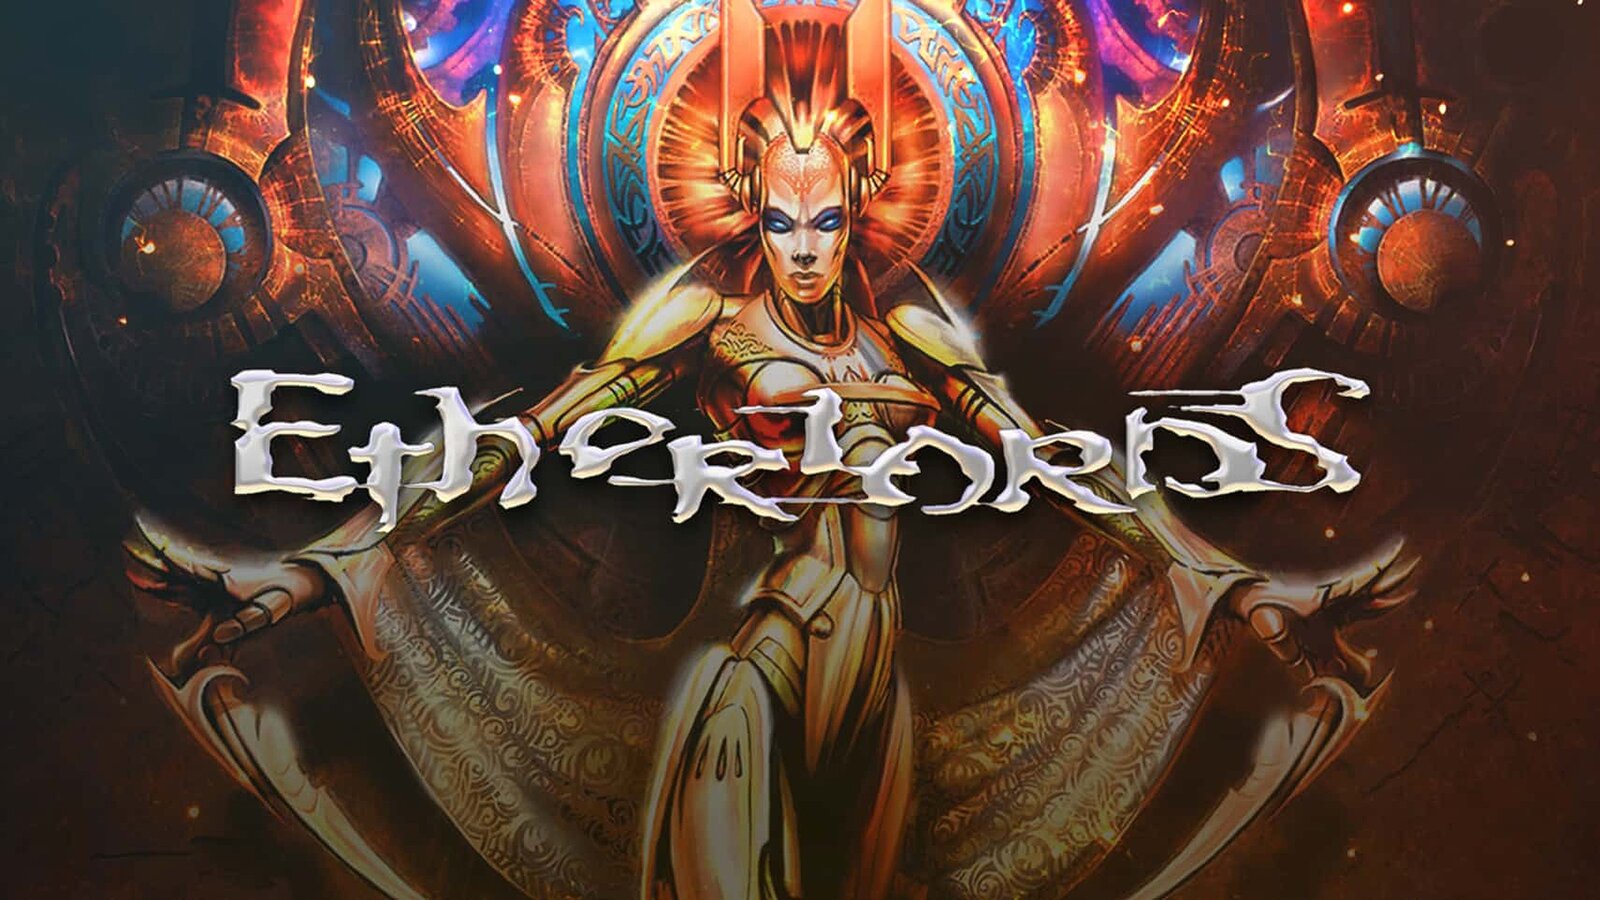 Etherlords